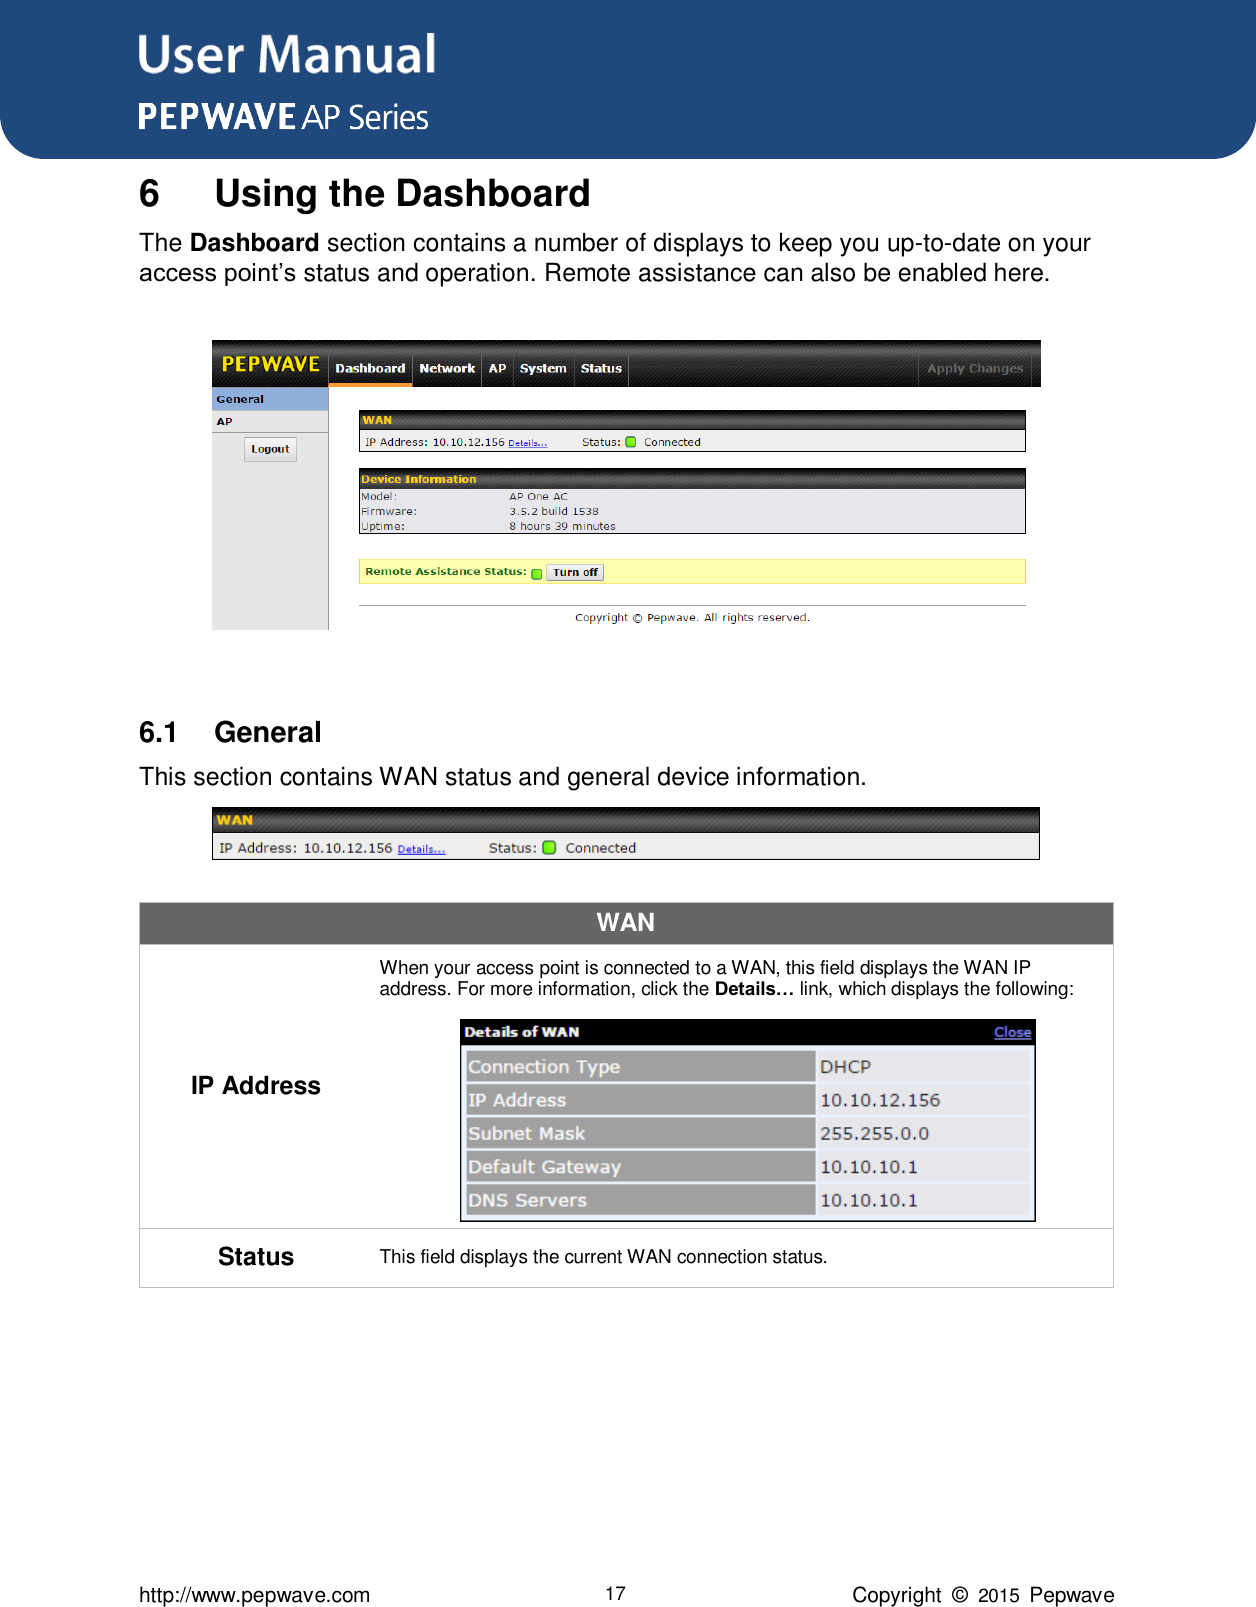 User Manual      http://www.pepwave.com 17 Copyright  ©  2015  Pepwave 6  Using the Dashboard The Dashboard section contains a number of displays to keep you up-to-date on your access point’s status and operation. Remote assistance can also be enabled here.     6.1  General This section contains WAN status and general device information.  WAN IP Address When your access point is connected to a WAN, this field displays the WAN IP address. For more information, click the Details… link, which displays the following: Status This field displays the current WAN connection status.       